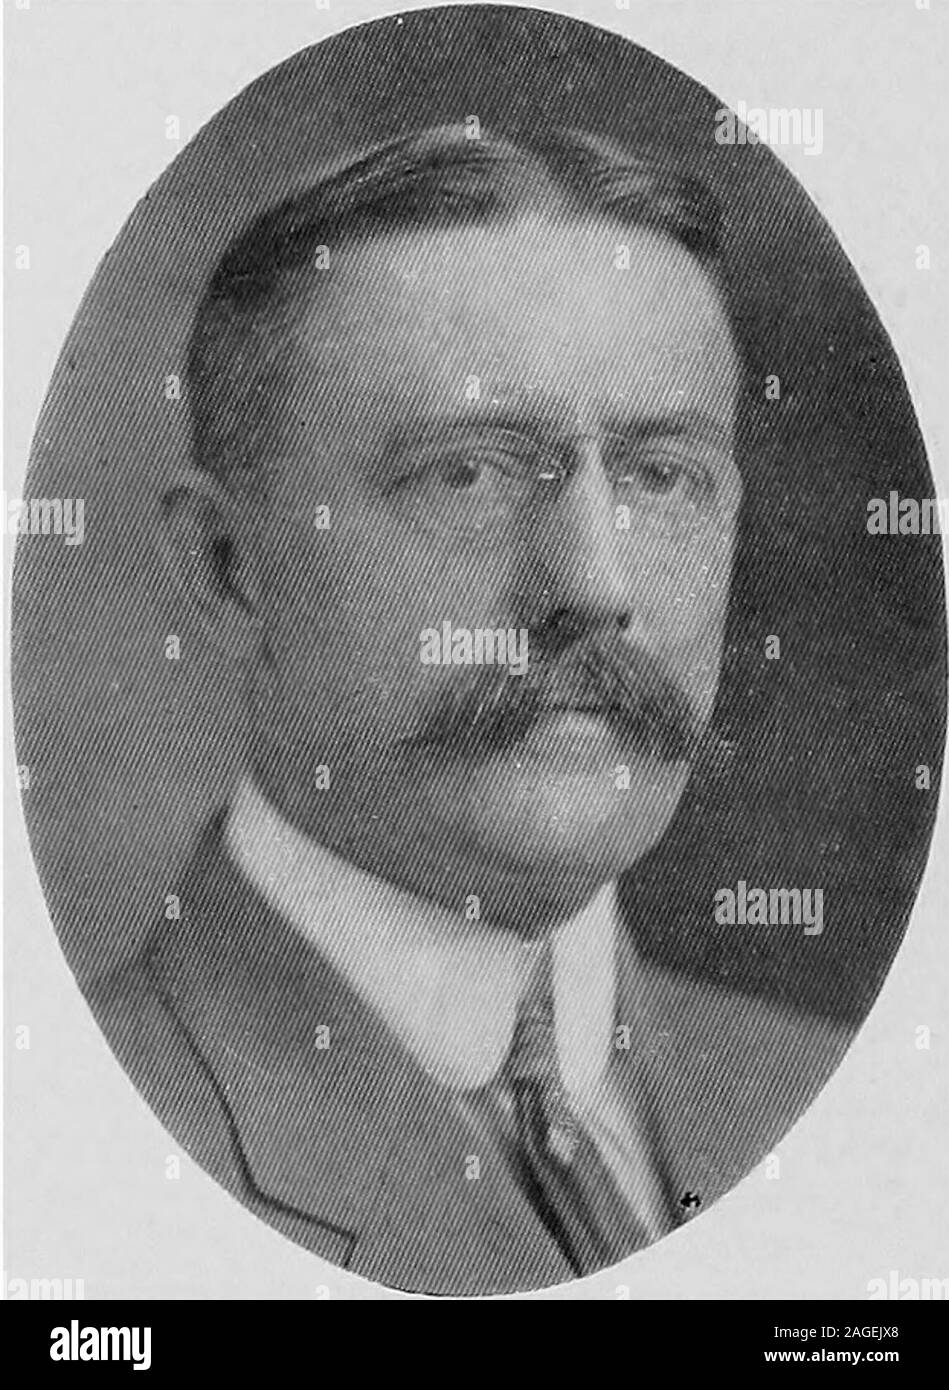 . Empire state notables, 1914. STEVENSON TOWLECivil Engineer, Chief of Sewers 1870-1886,Rapid Transit Commr 1887, Park Commr1898, Consulting Eng. to D. P. W. 1889-1897,Consg Eng. to Sewerage Rapid Transit 1897New York City BERNARD MATTHEW WAGNER Civil Engineer, Organization, Design and Construction New York City 574 Empire State Notables engineers. Stock Photo